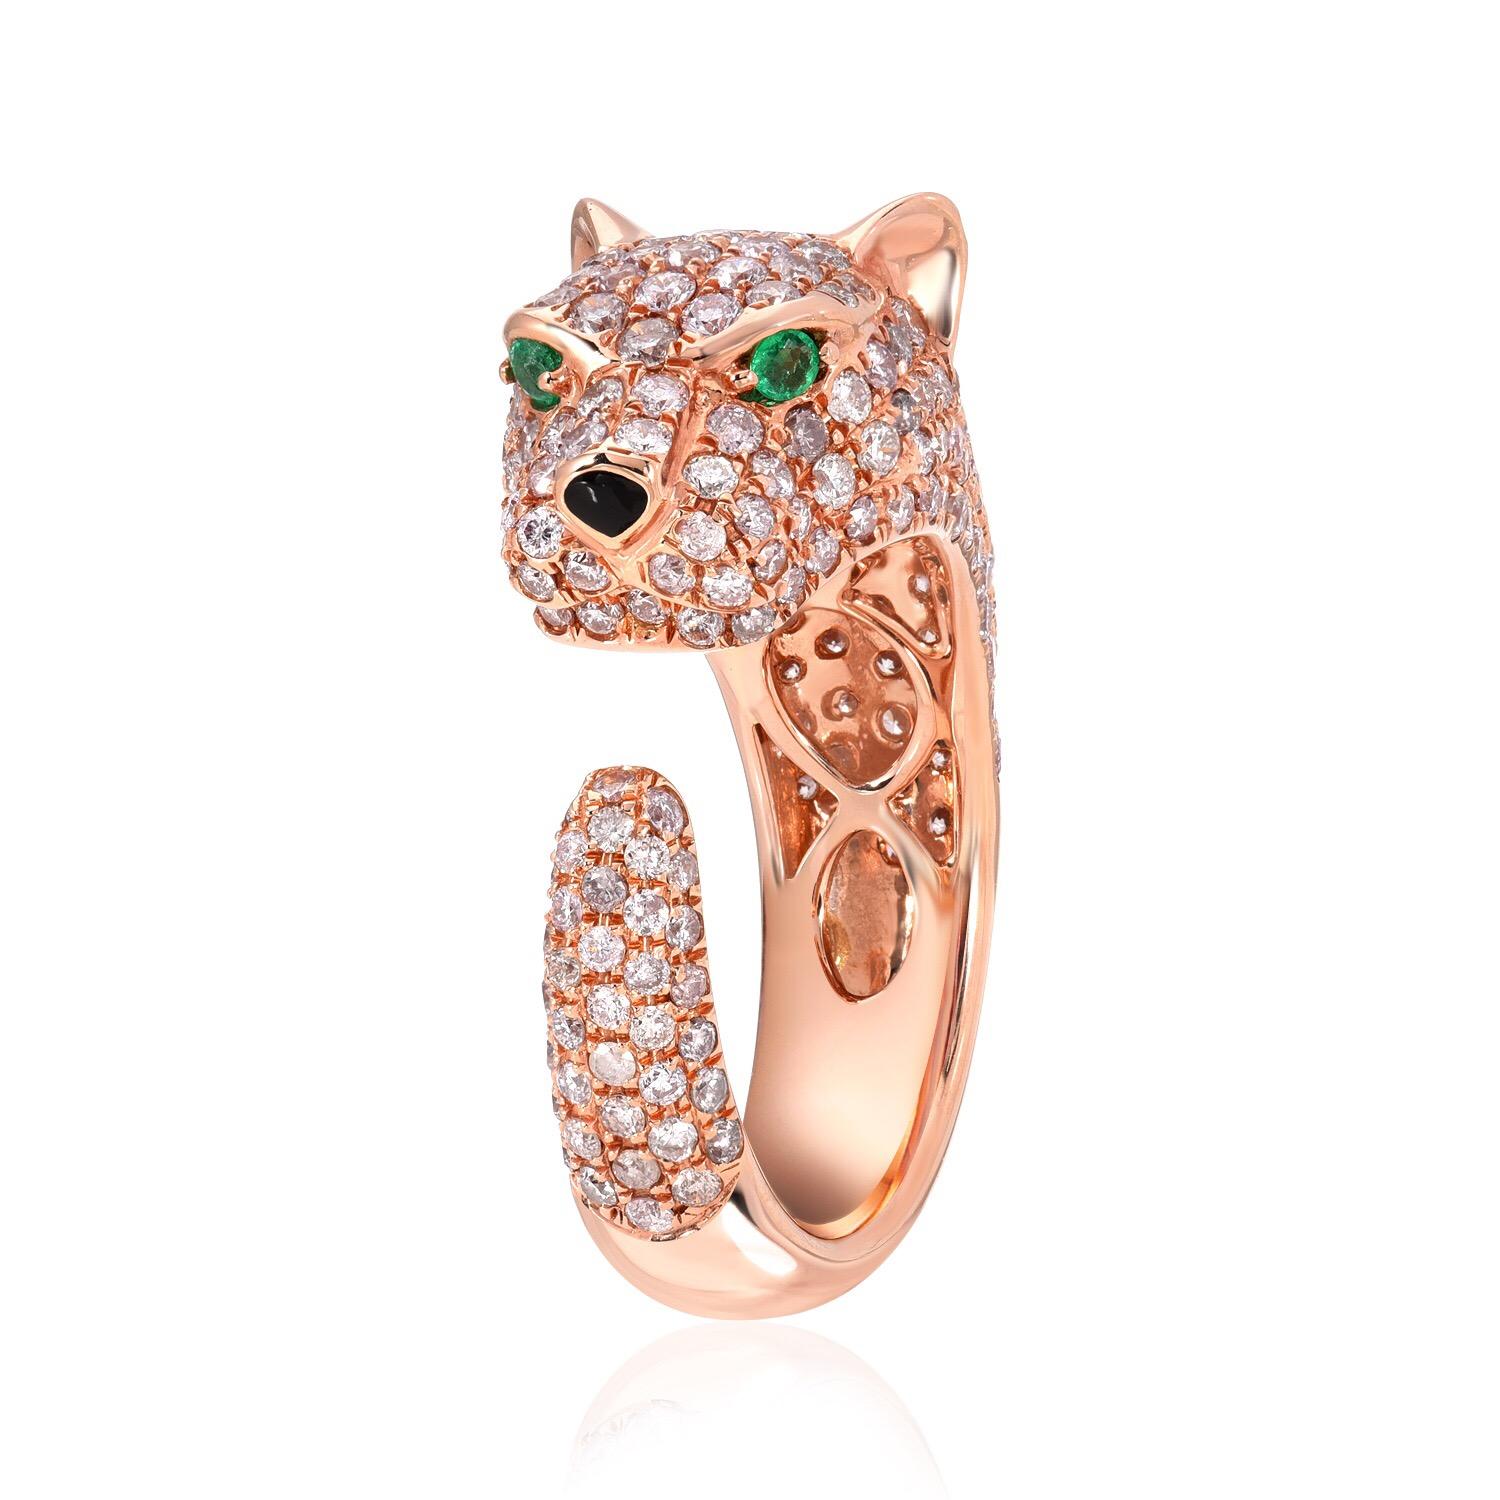 Panther Pink Diamond ring, set with a total of 2.52 carats of round natural Pink Diamonds, accented by Emeralds in the eyes weighing a total of 0.05 carats, in 18K rose gold.
Ring size 6.5. Re-sizing is complimentary upon request.
Returns are